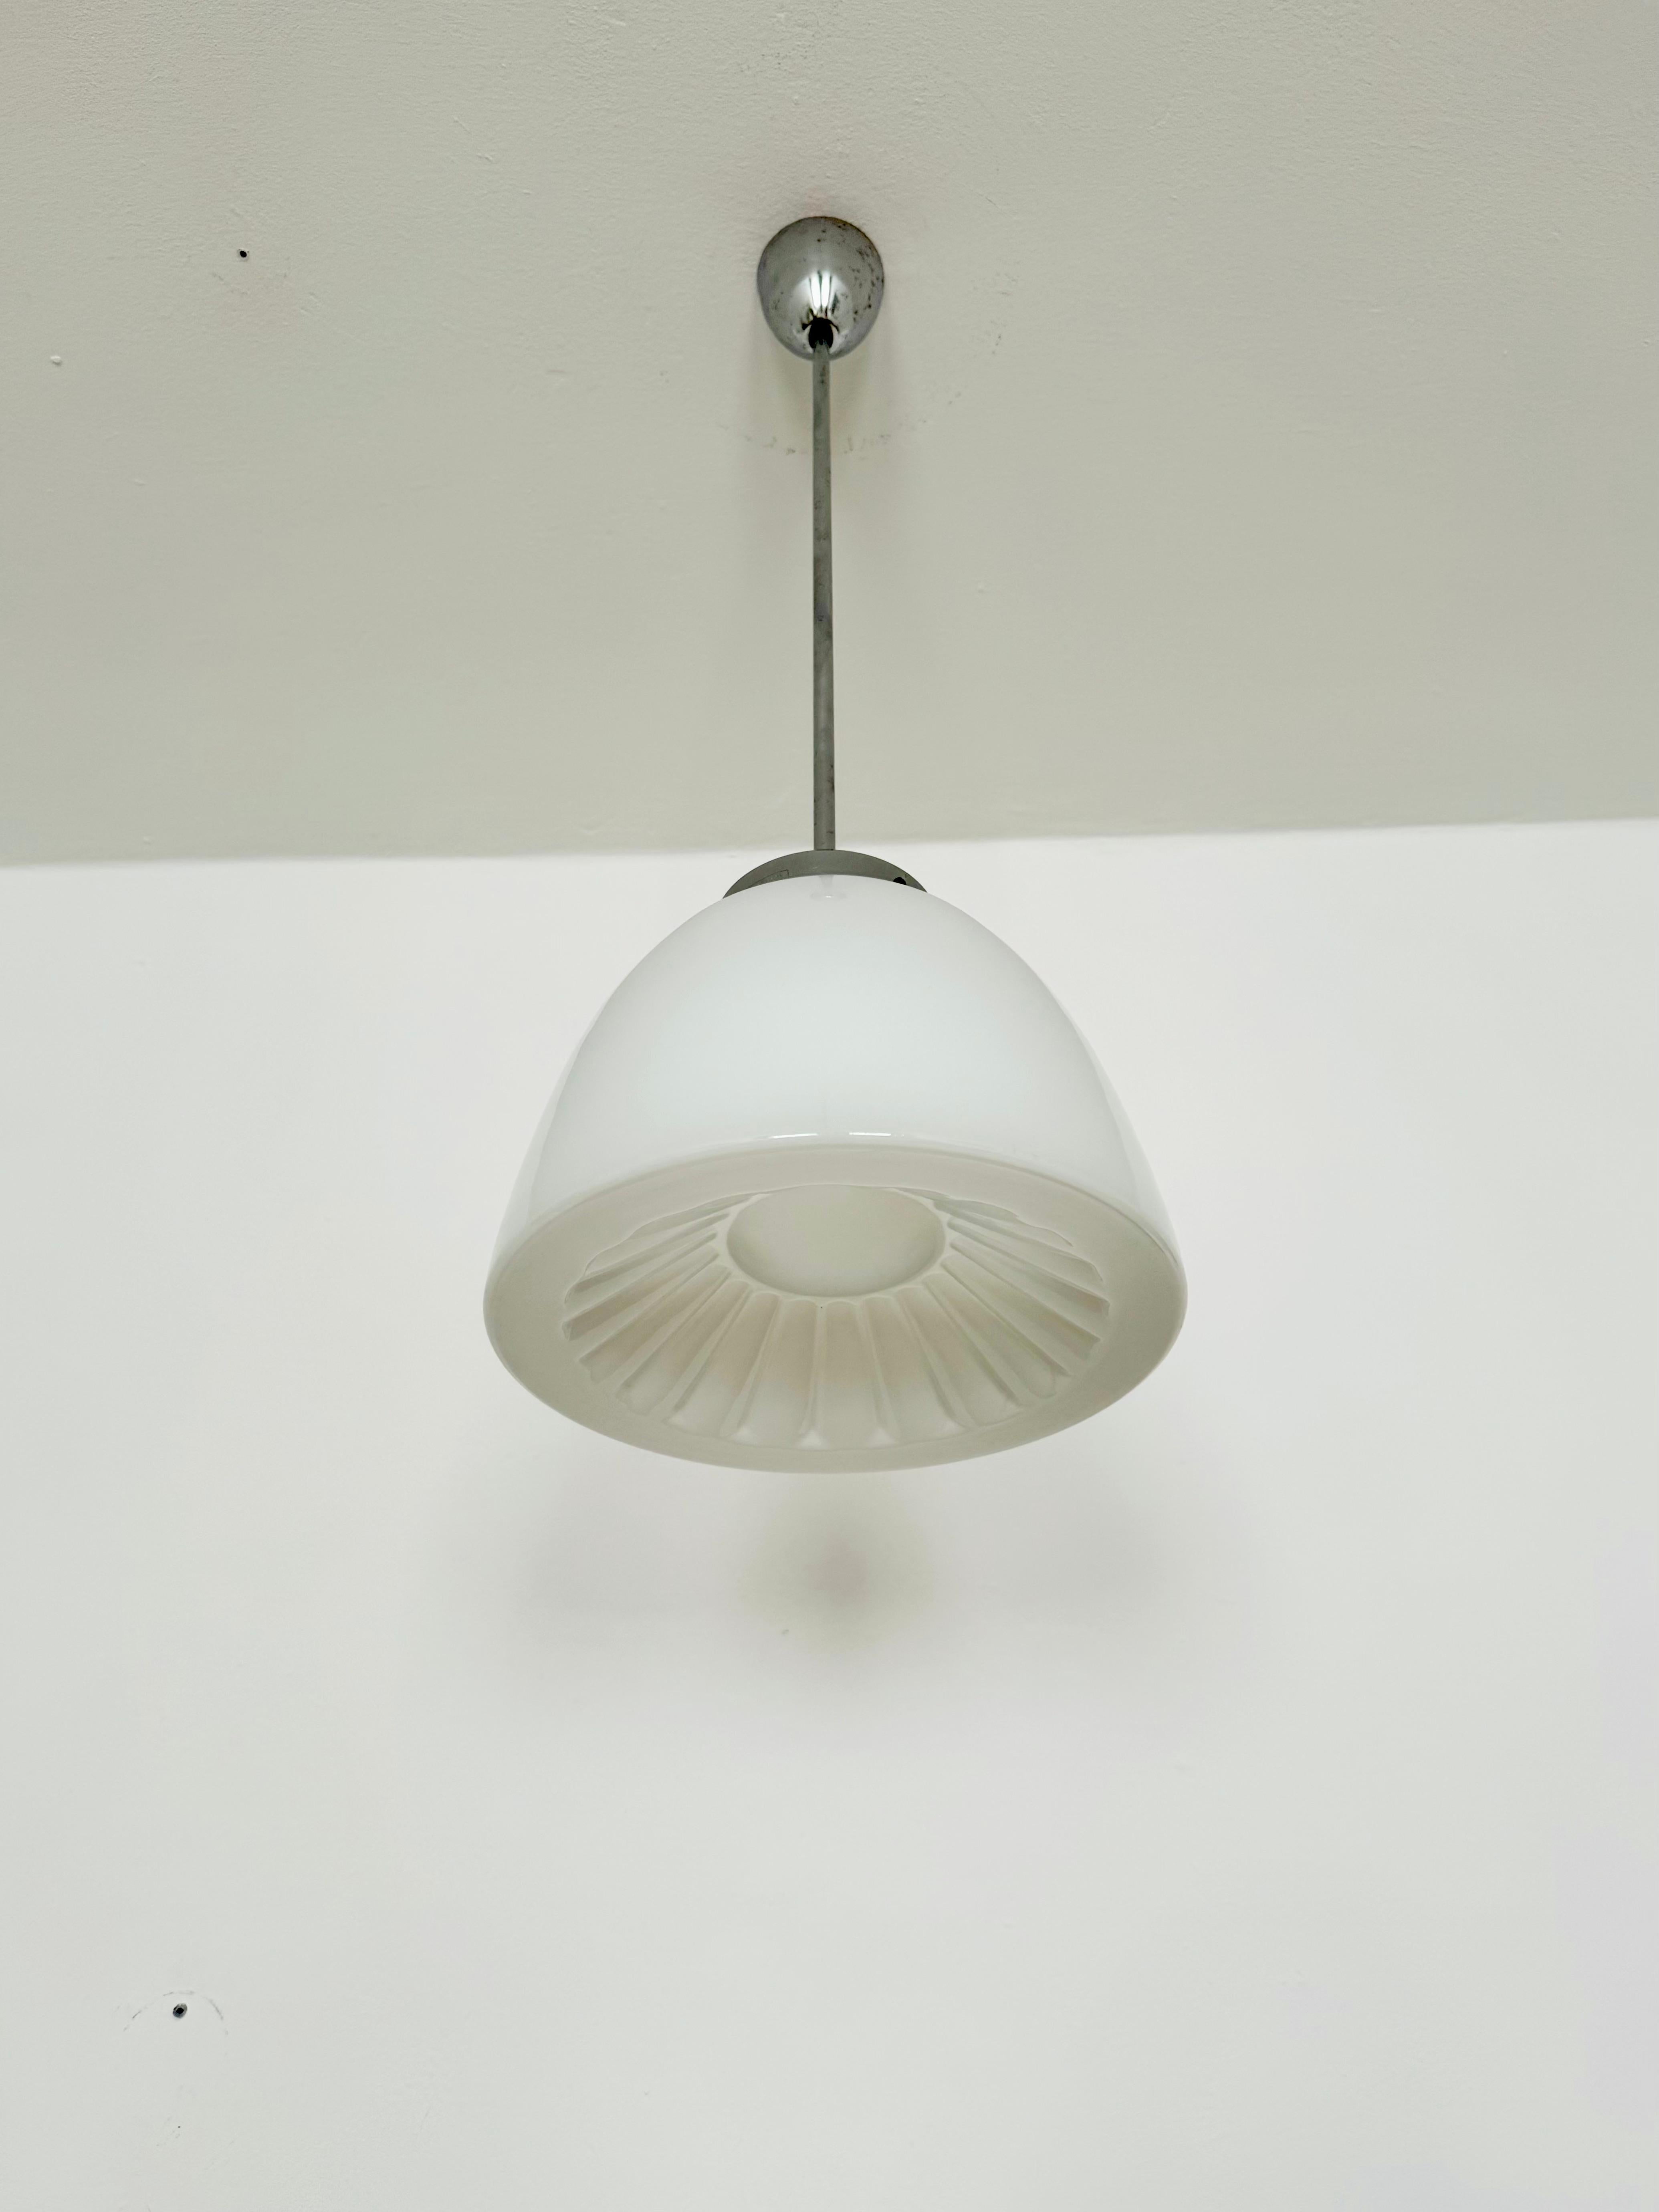 Exceptionally beautiful ceiling lamp from the 1950s.
The lamp emits a very pleasant, warm light.
Wonderful shape and a timeless classic.

Manufacturer: Napako

Condition:

Very good vintage condition with slight signs of age-related wear.
The glass